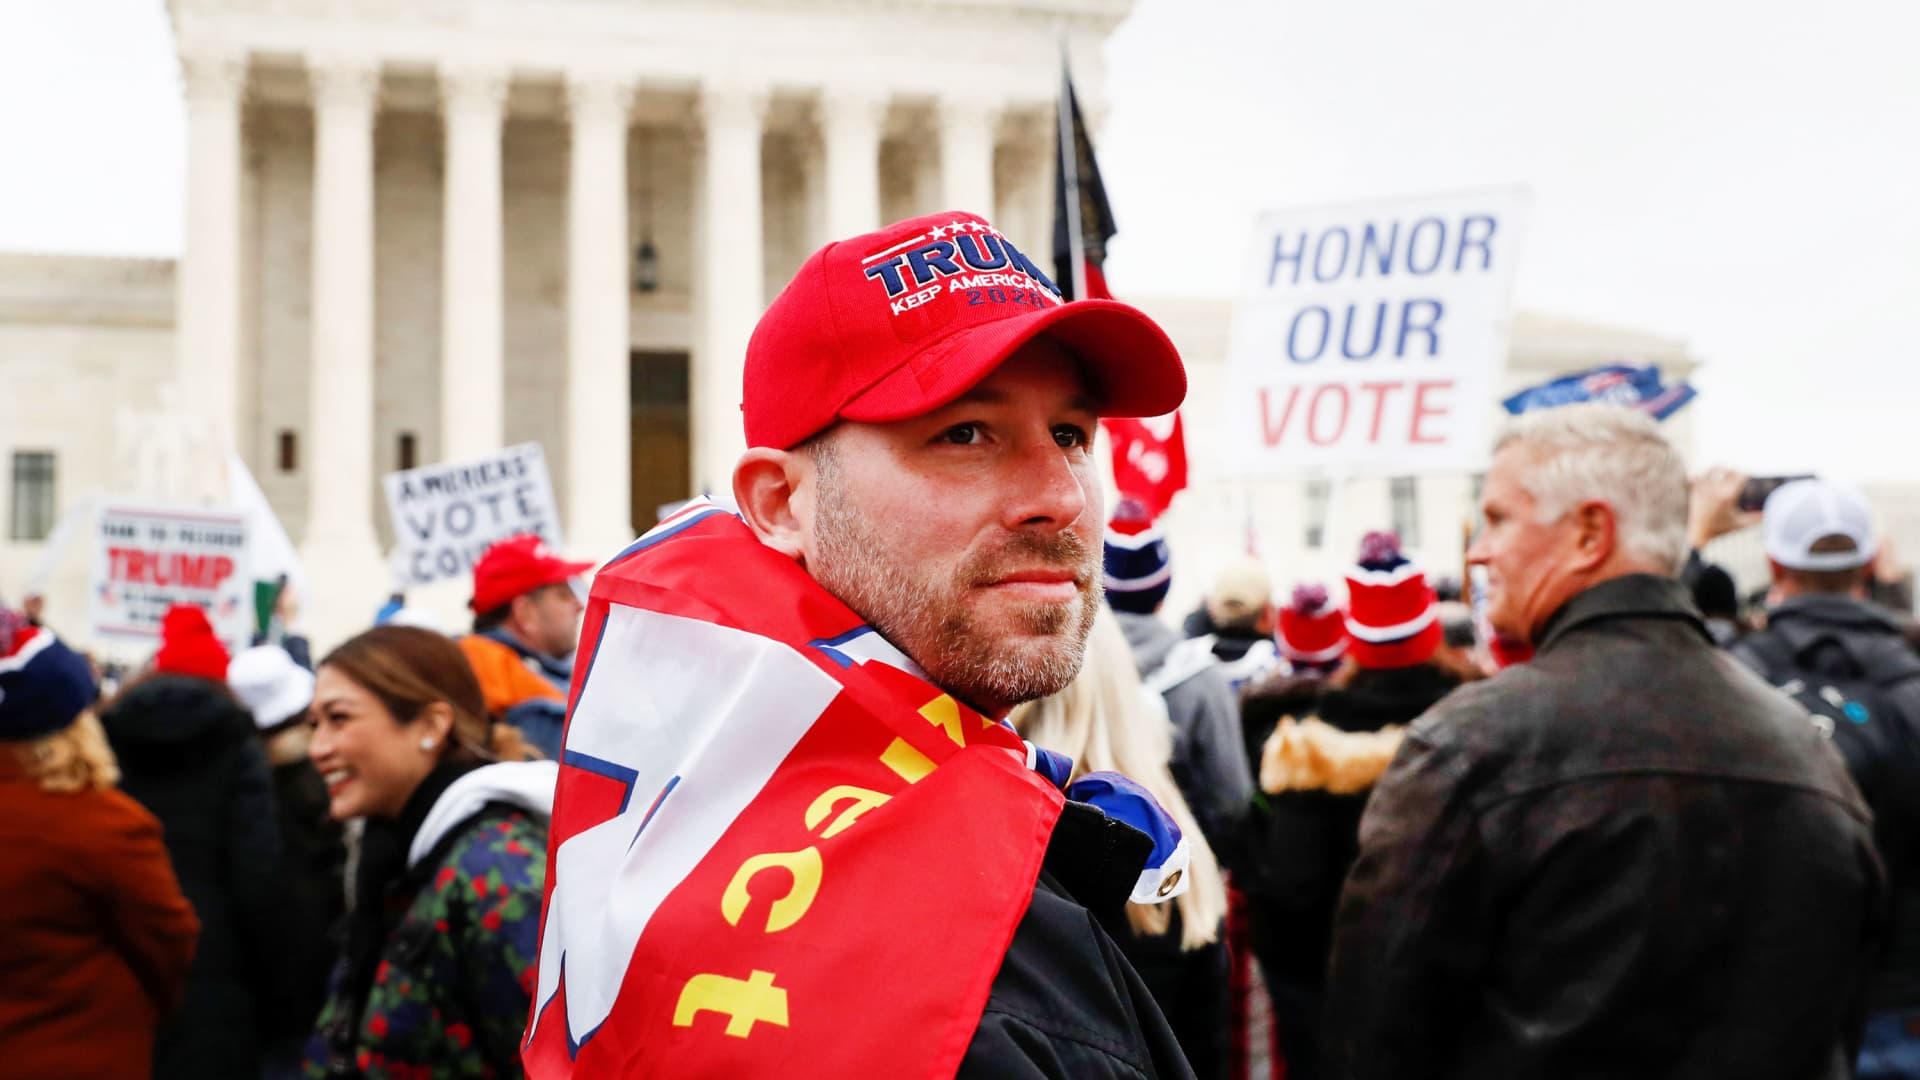 A supporter of U.S. President Donald Trump looks on as others gather in front of the Supreme Court building ahead of the U.S. Congress certification of the November 2020 election results during protests in Washington, January 5, 2021.